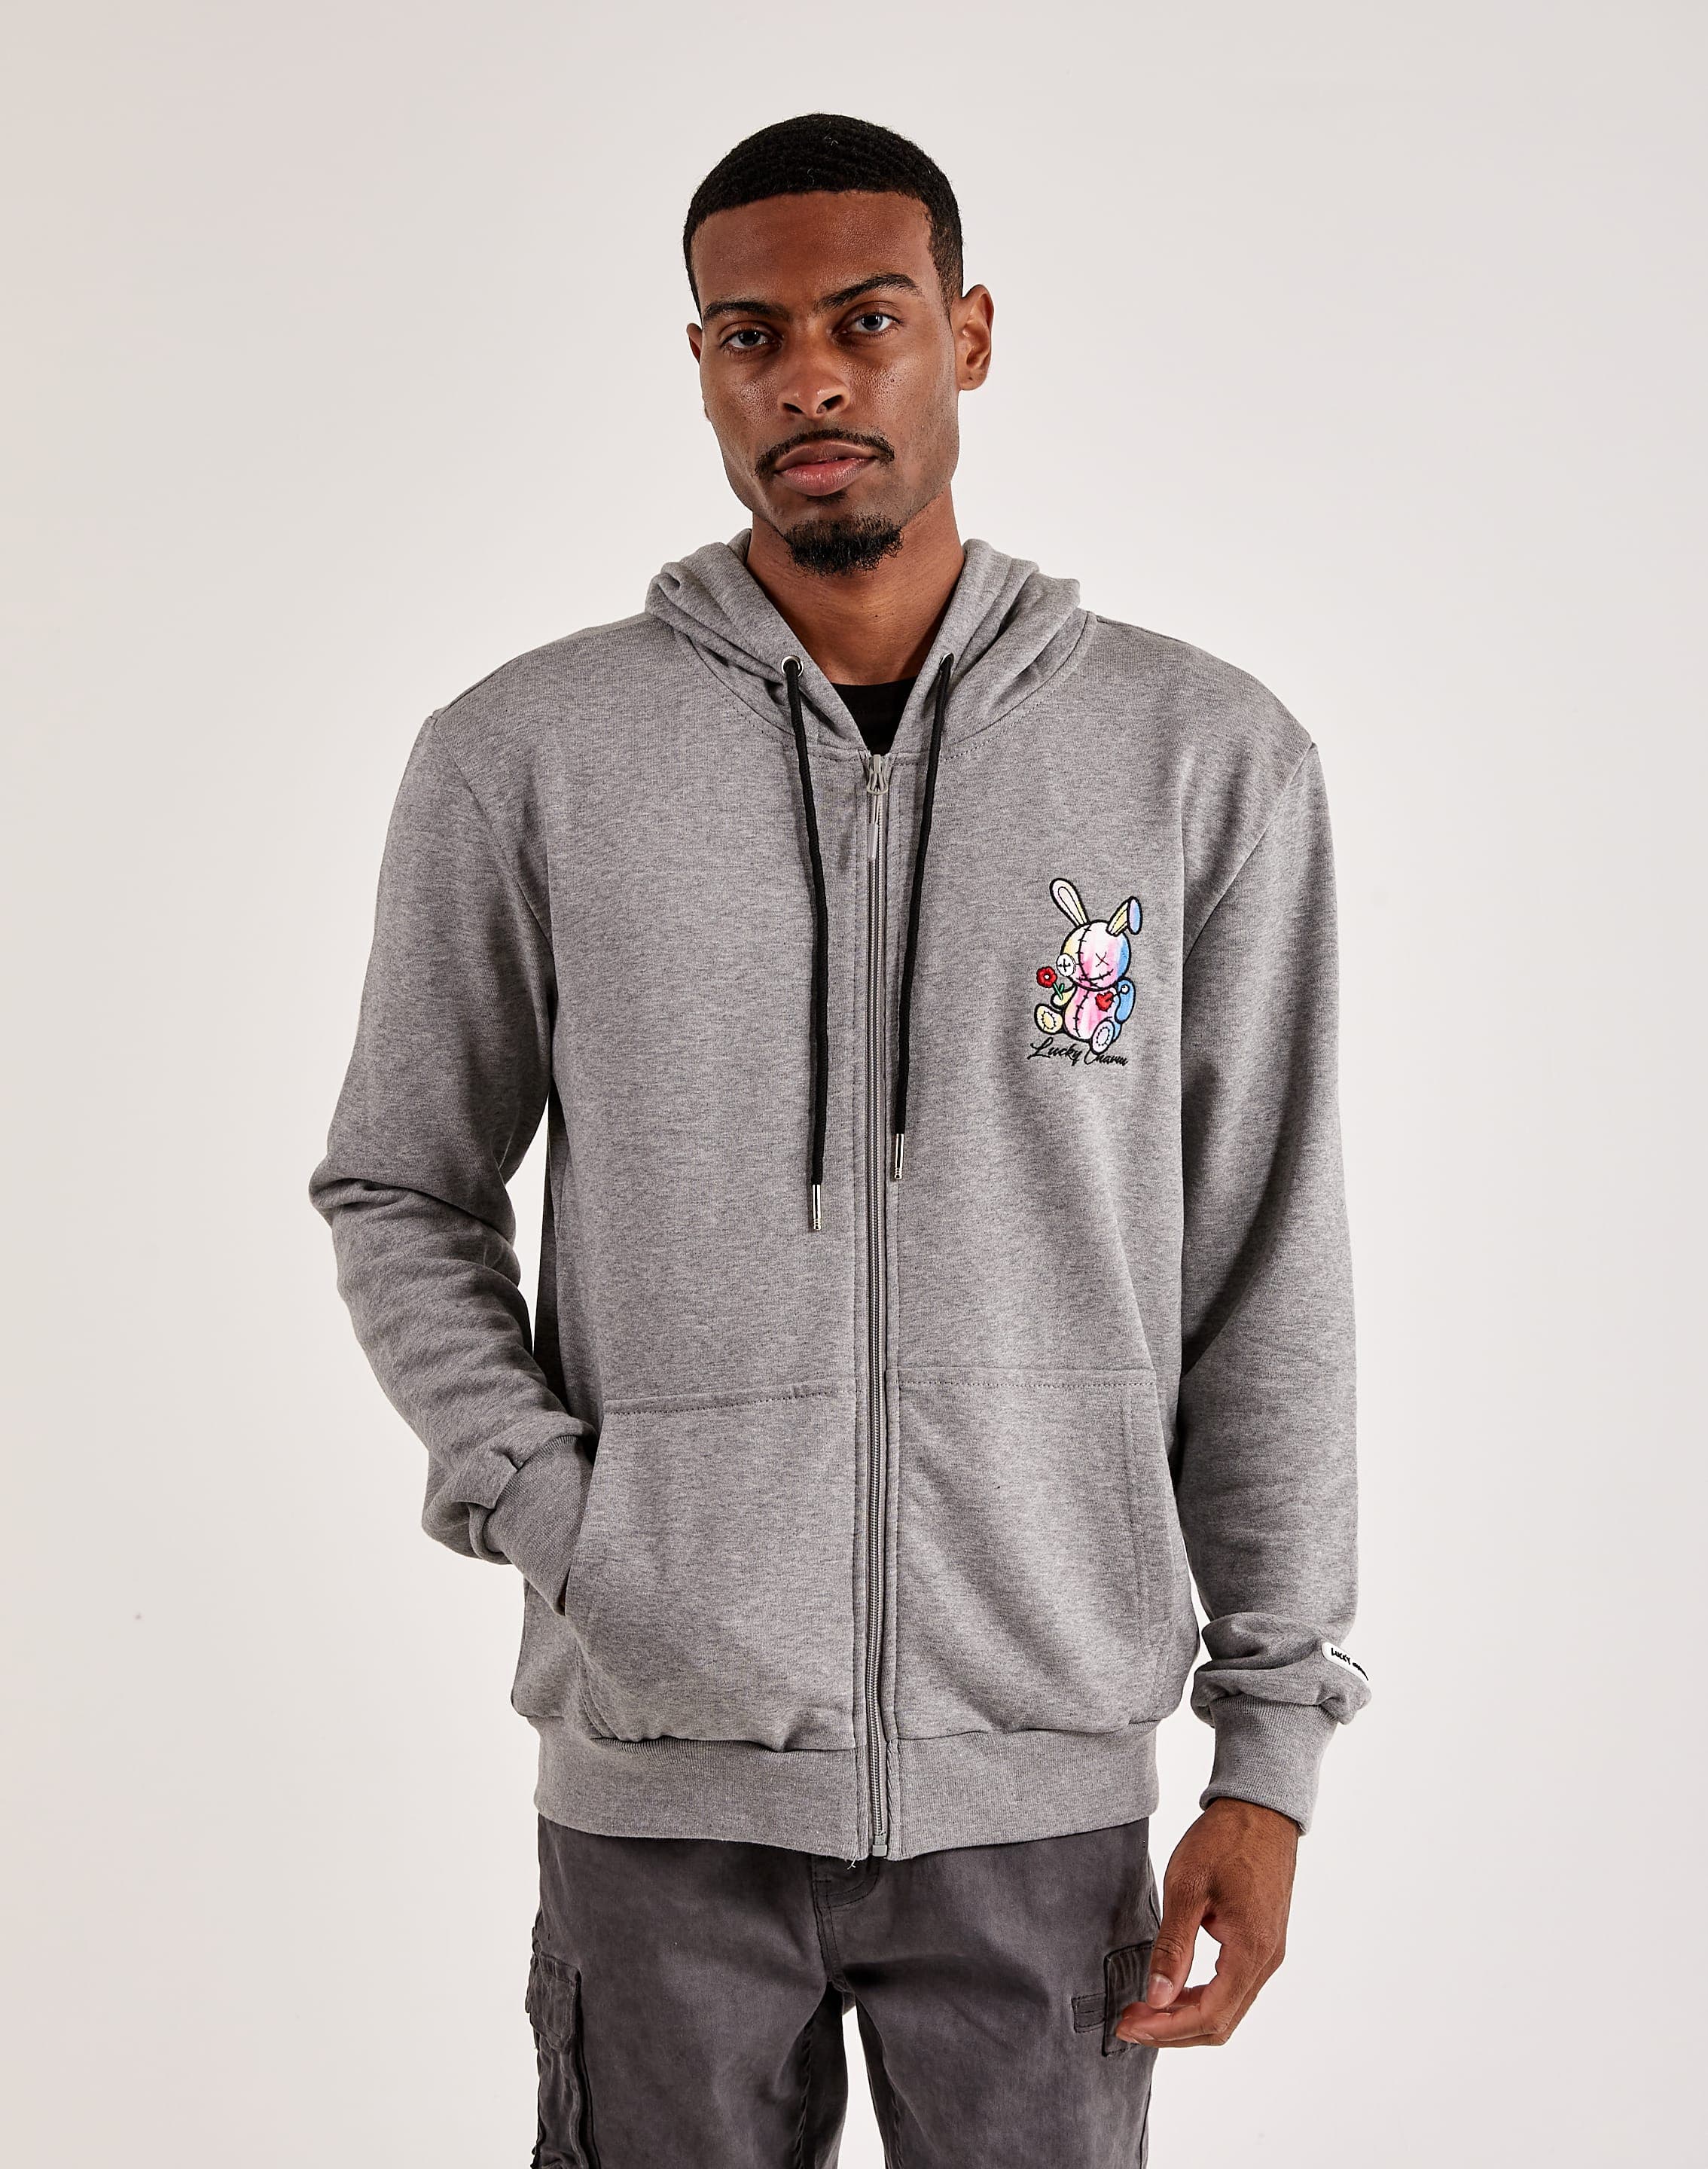 BKYS Lucky Charm Zip-Up Hoodie